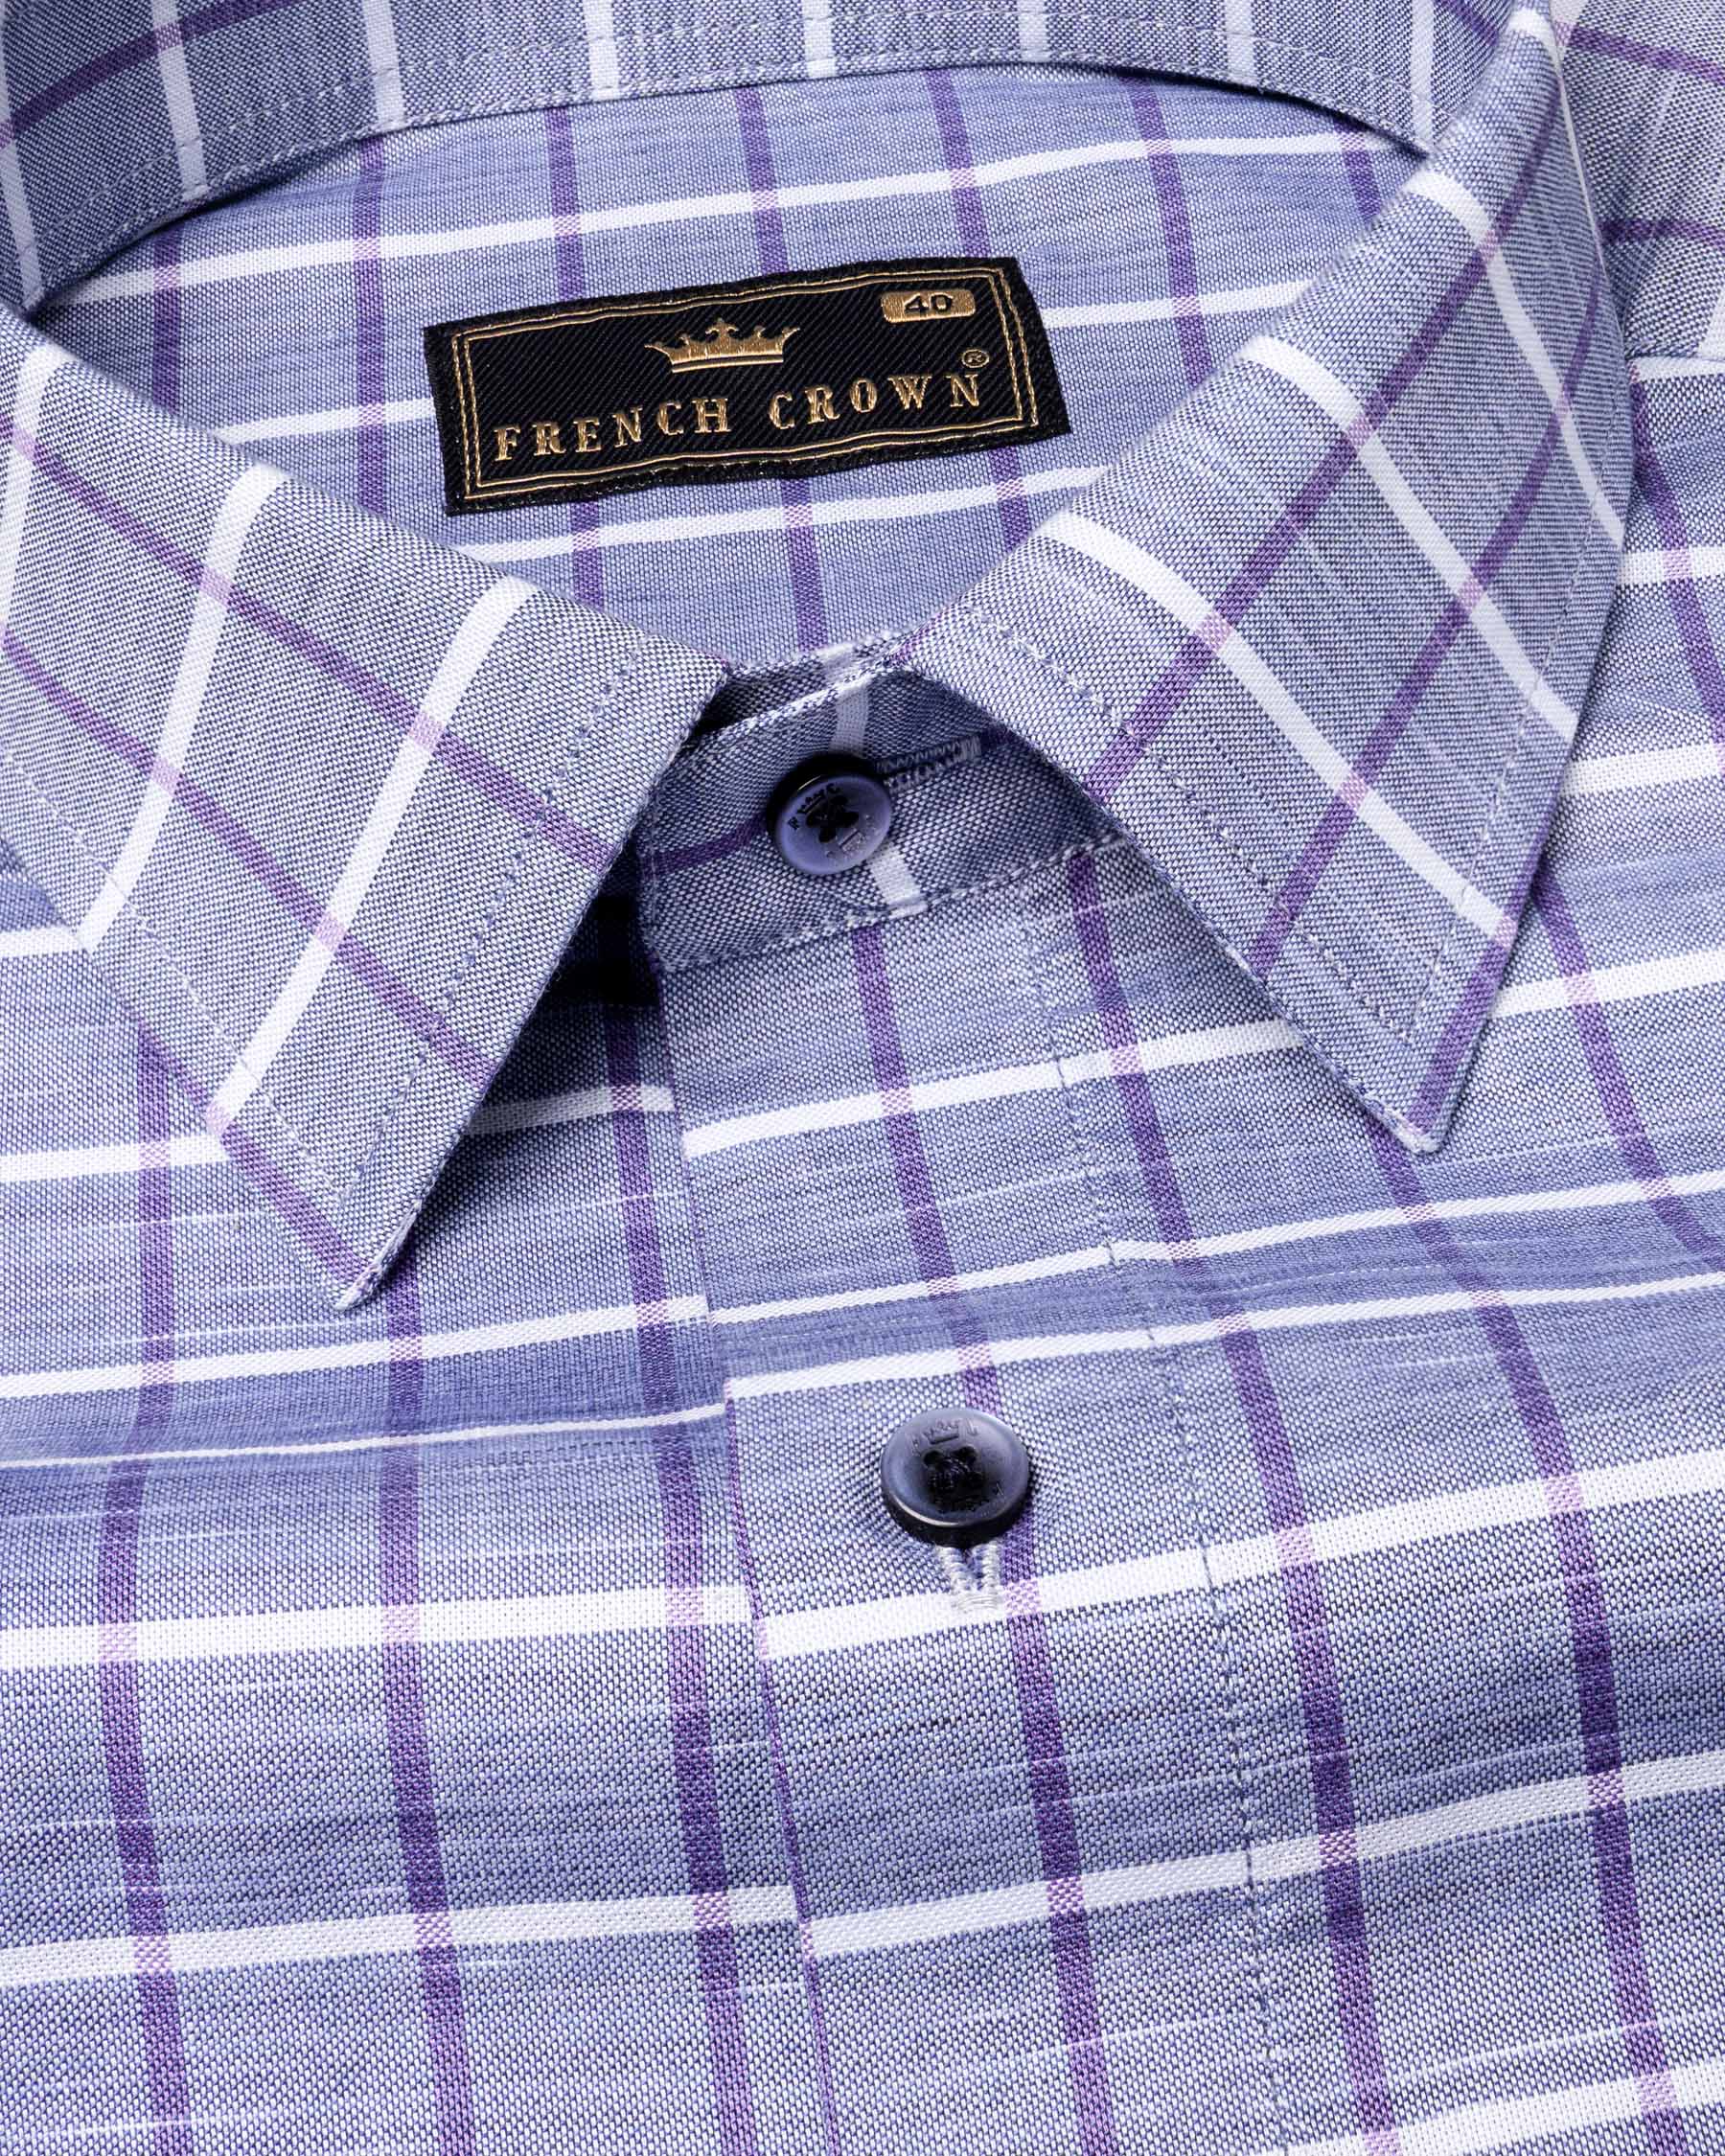 Ship Cove and Deluge Blue Checkered Royal Oxford Shirt 6273-BLE-38, 6273-BLE-H-38, 6273-BLE-39, 6273-BLE-H-39, 6273-BLE-40, 6273-BLE-H-40, 6273-BLE-42, 6273-BLE-H-42, 6273-BLE-44, 6273-BLE-H-44, 6273-BLE-46, 6273-BLE-H-46, 6273-BLE-48, 6273-BLE-H-48, 6273-BLE-50, 6273-BLE-H-50, 6273-BLE-52, 6273-BLE-H-52